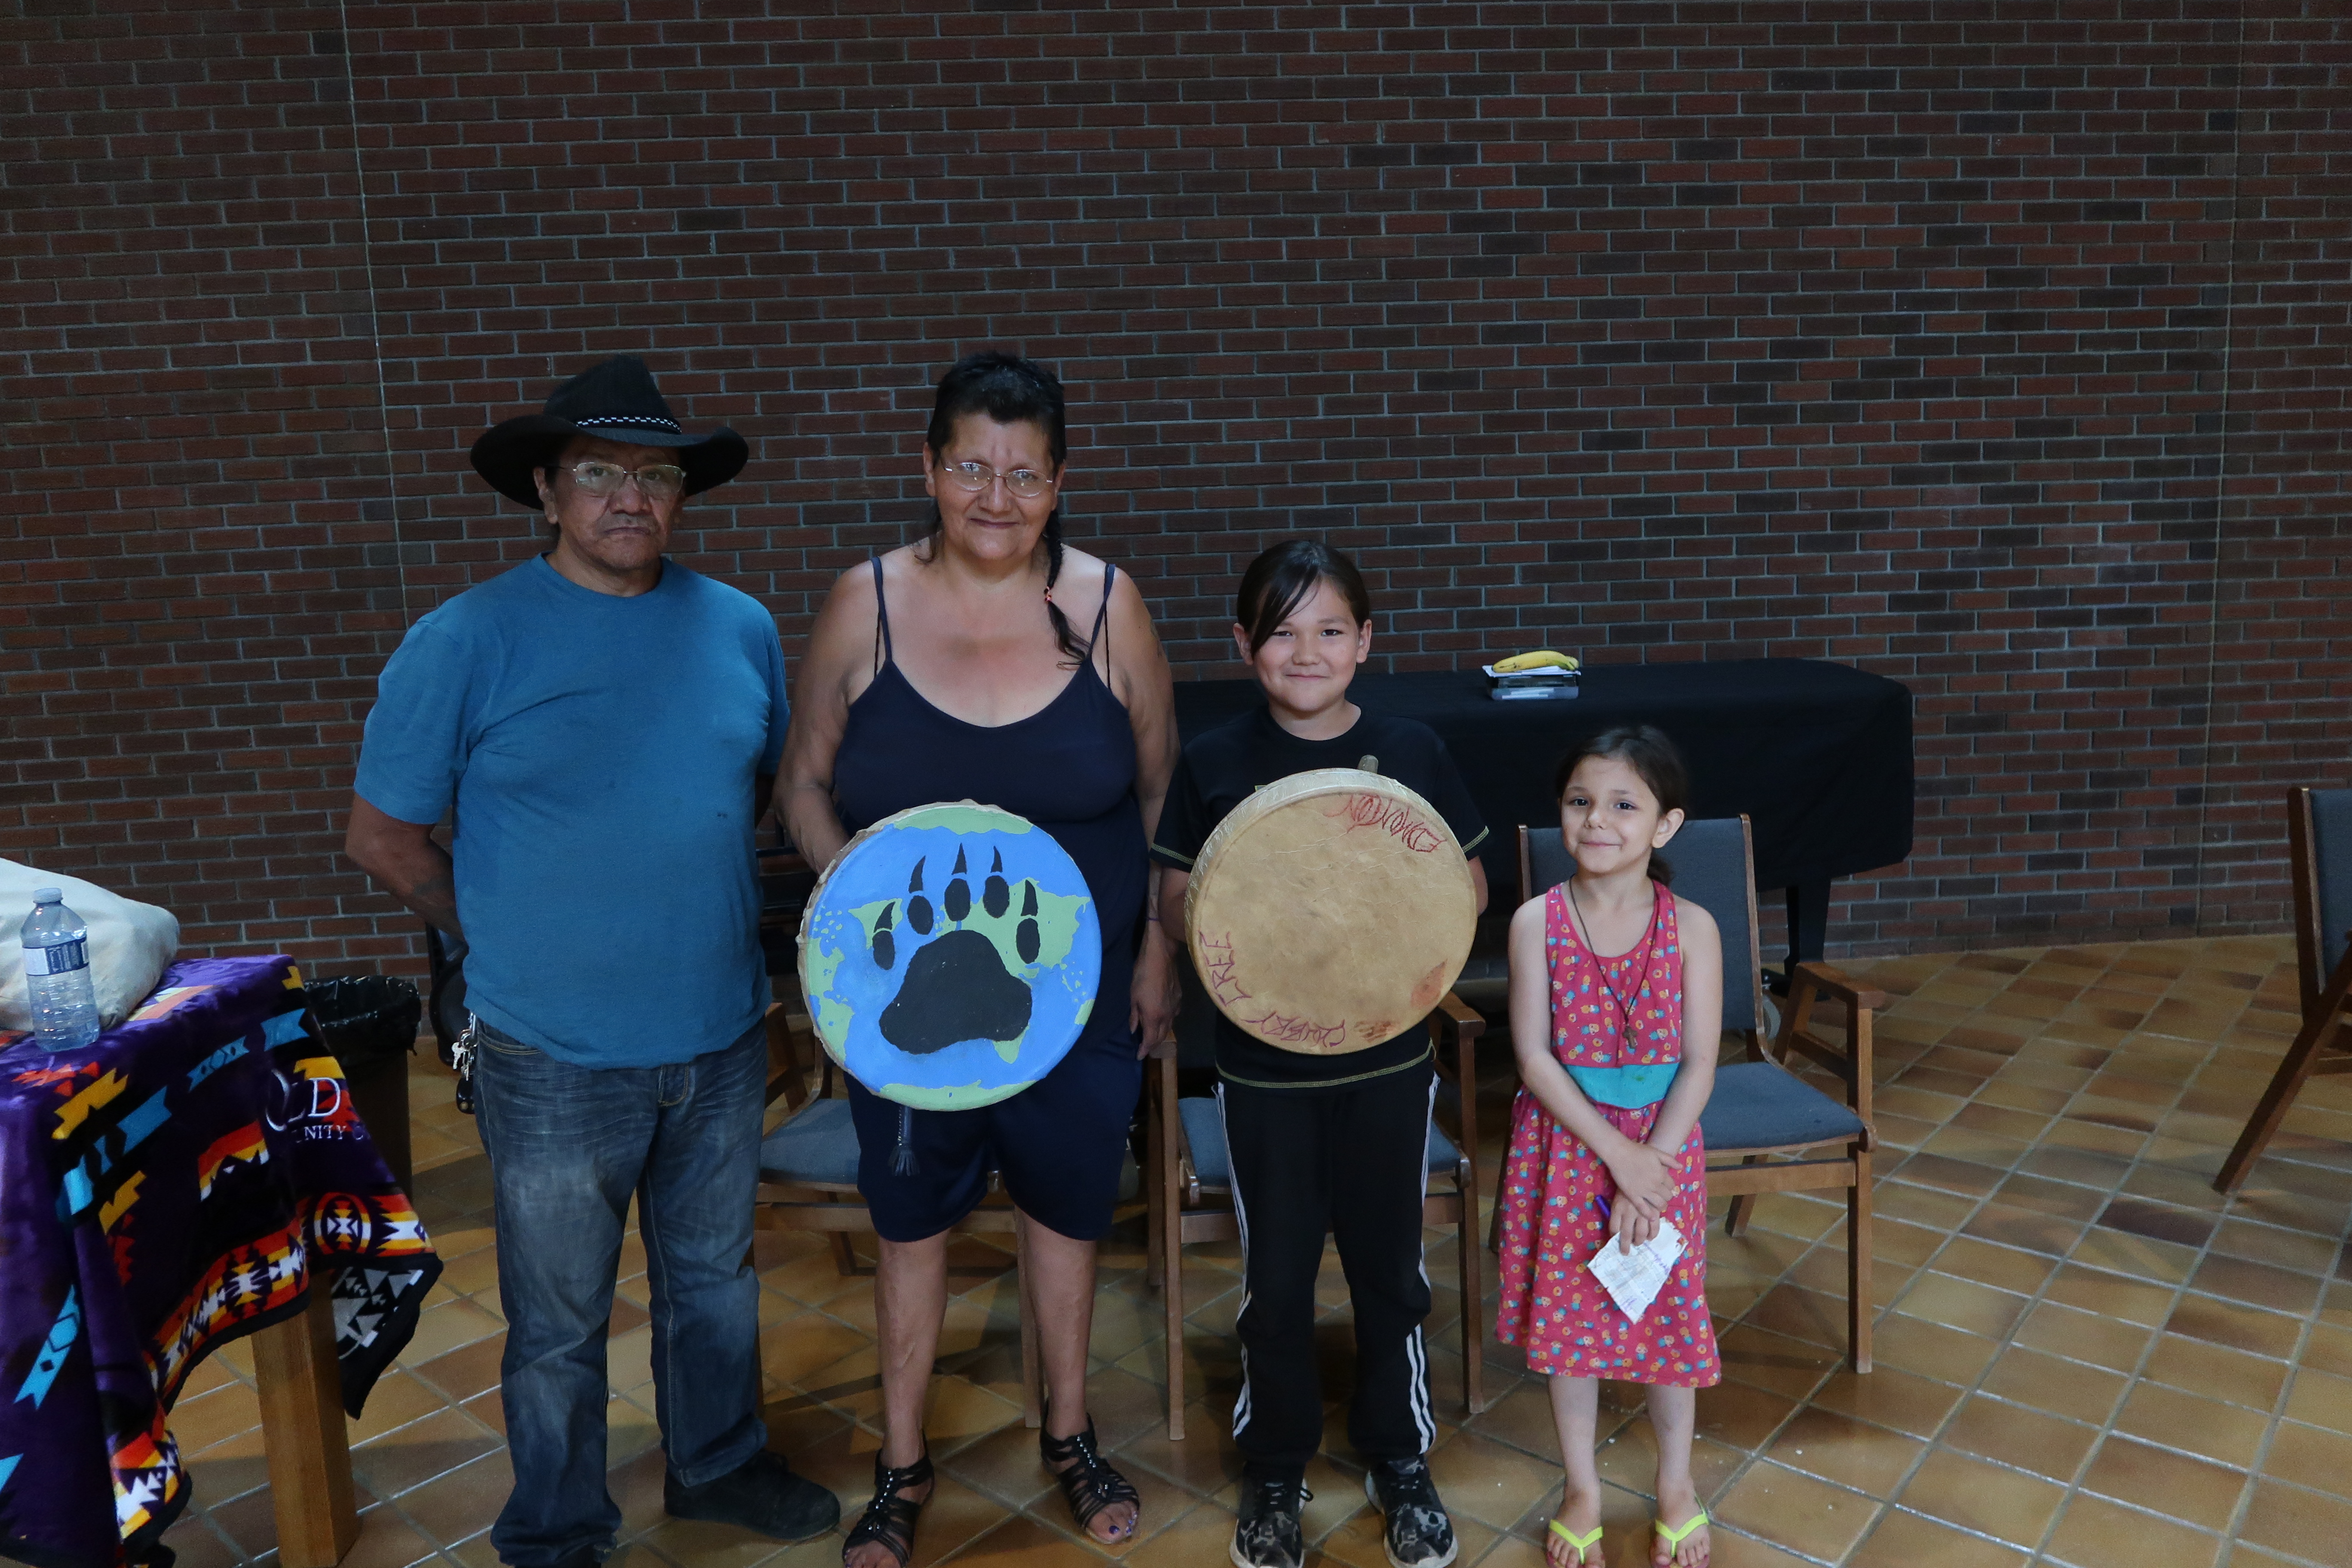 Four people lined up two holding a drum